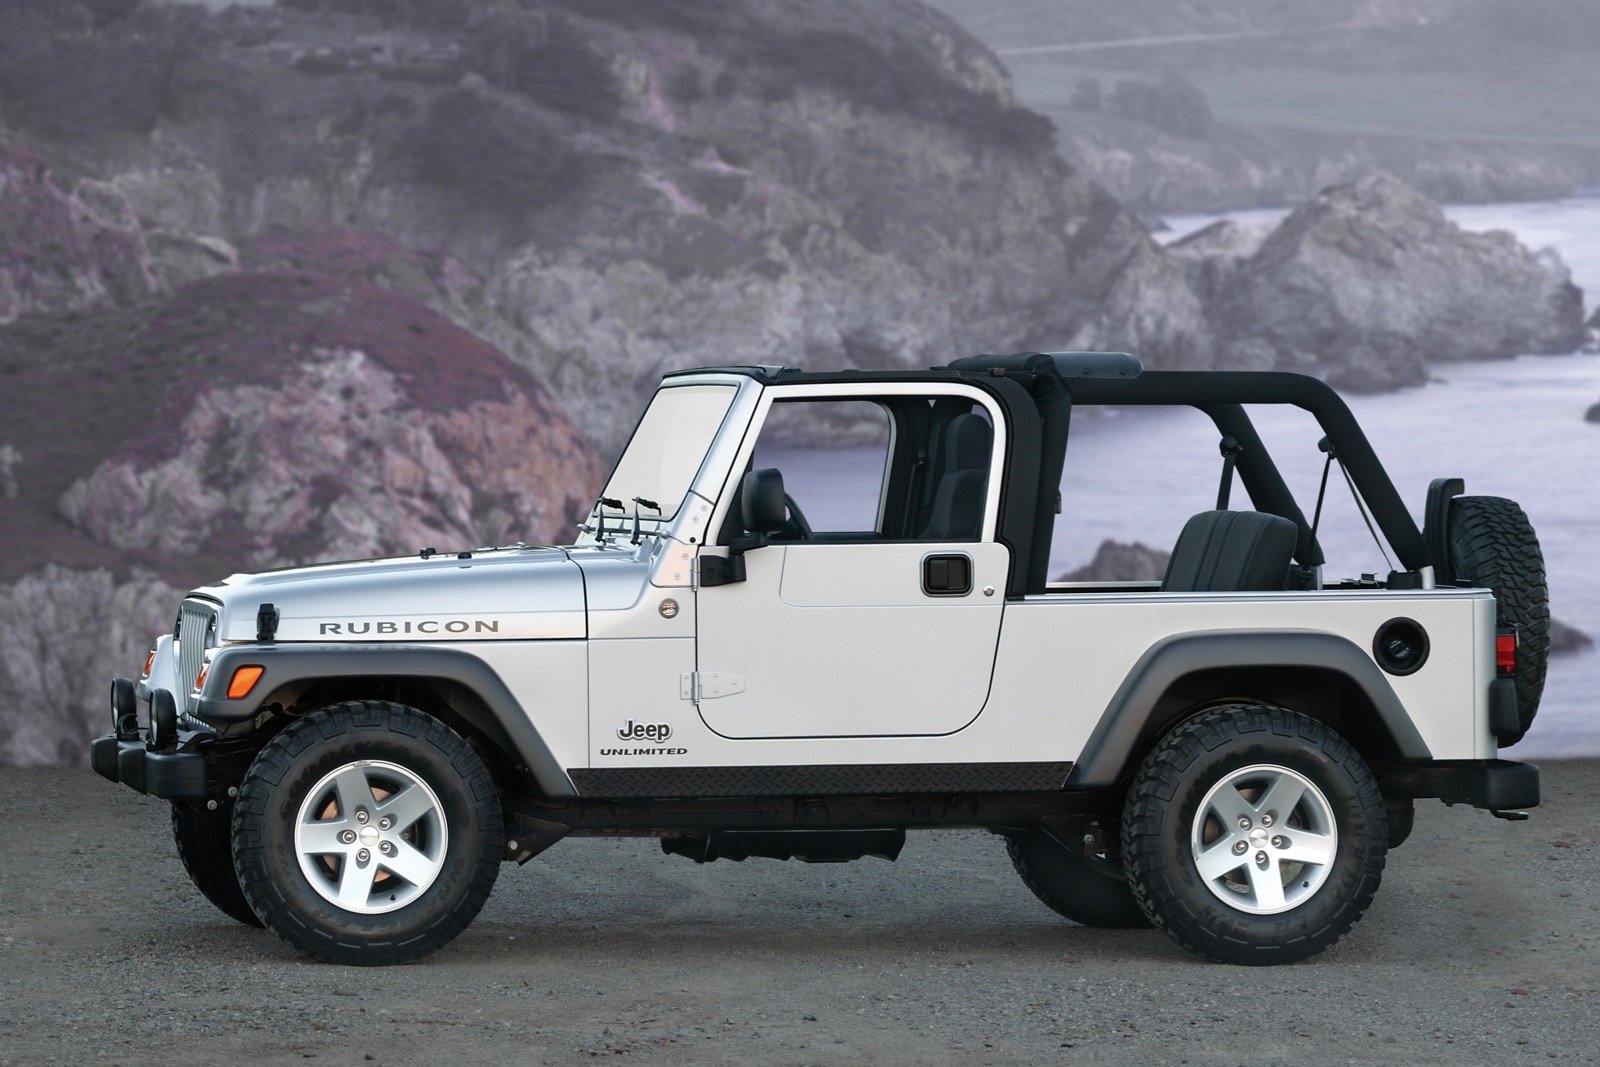 2005 Jeep Wrangler: Prices, Reviews & Pictures - CarGurus